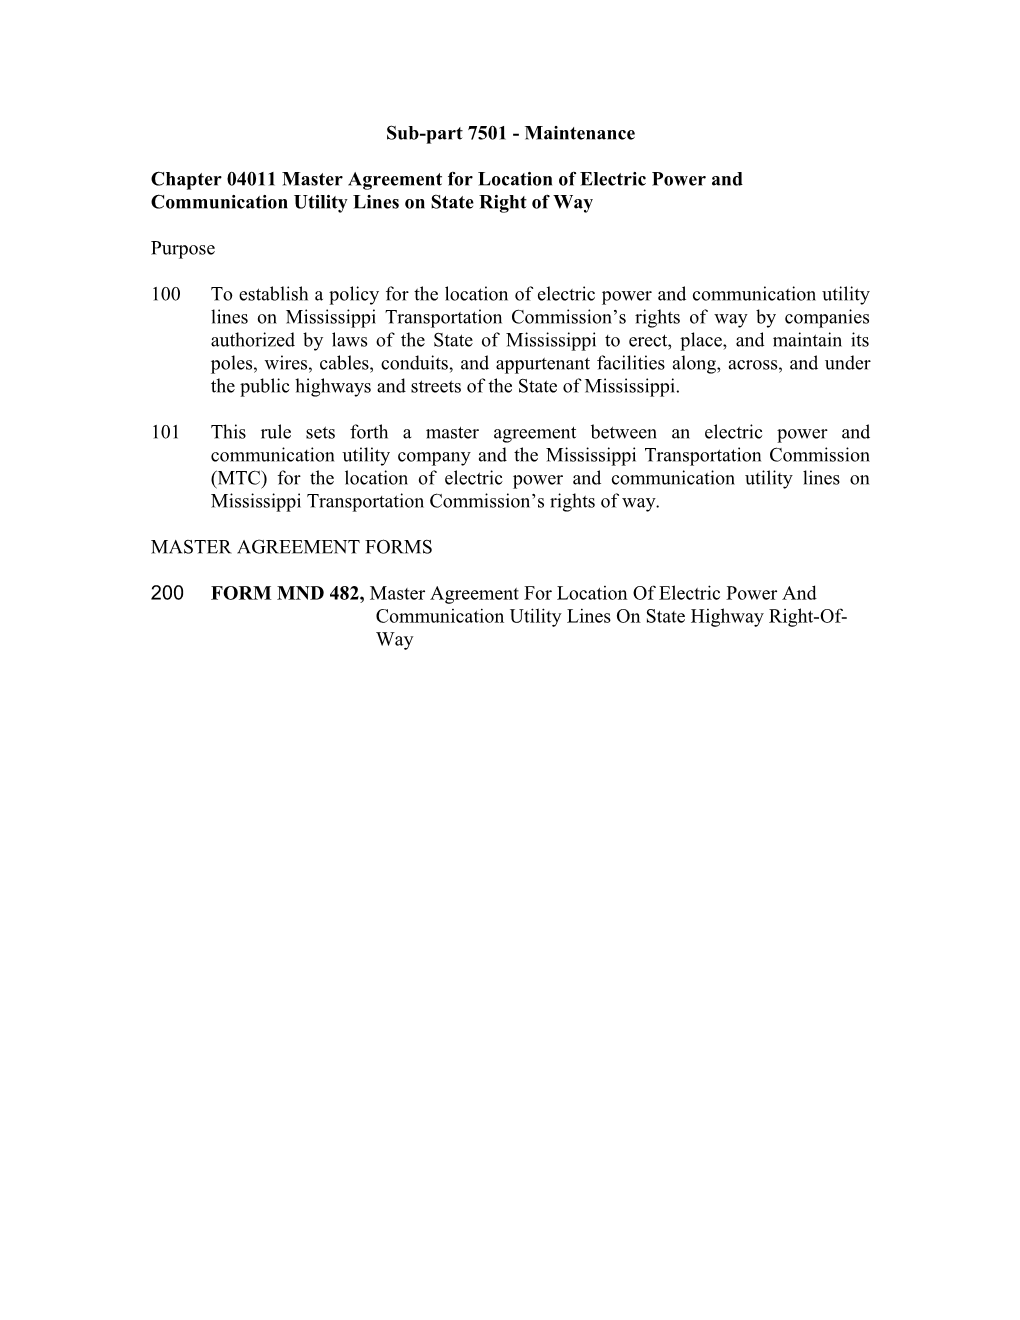 Master Agreement for Location of Electric Power and Communication Utility Lines